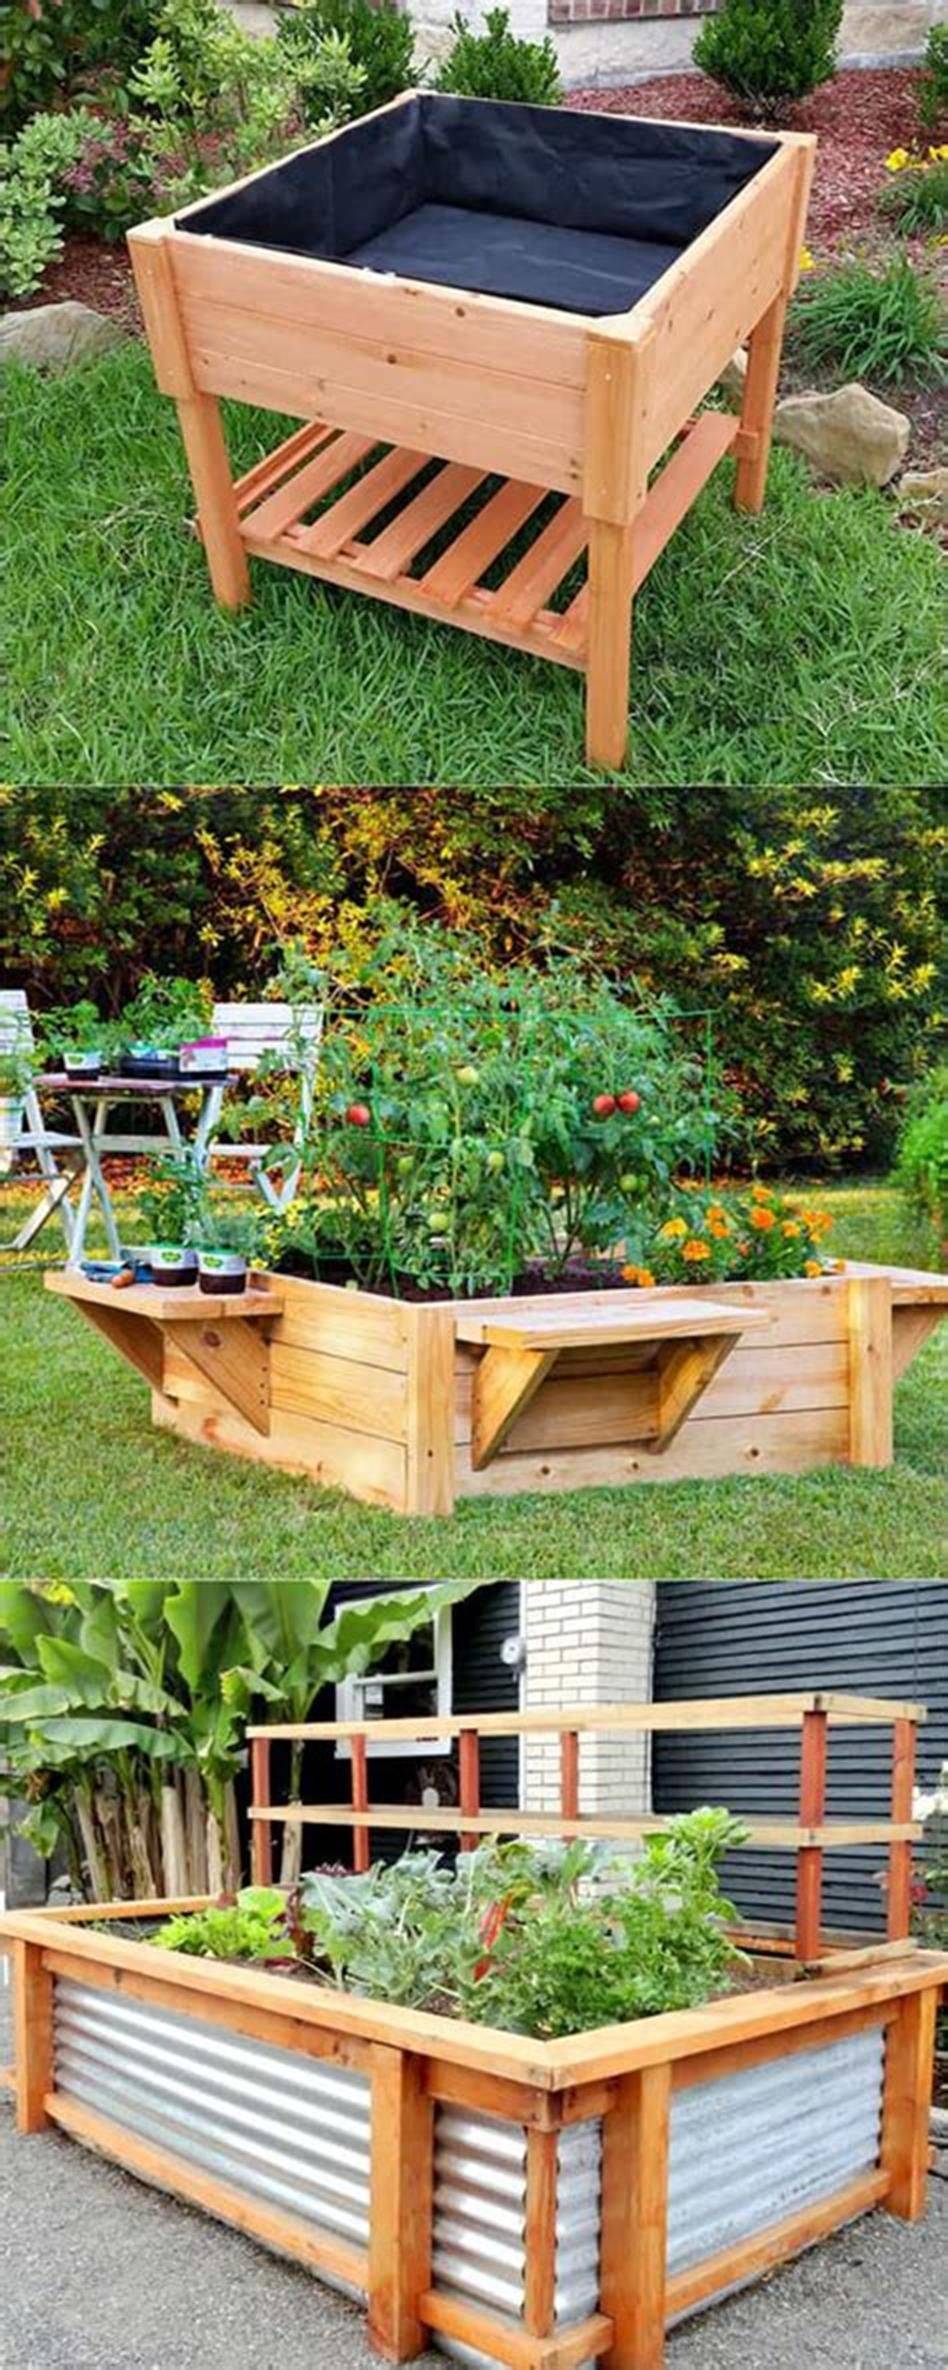 Cheap And Easymake Raised Garden Beds